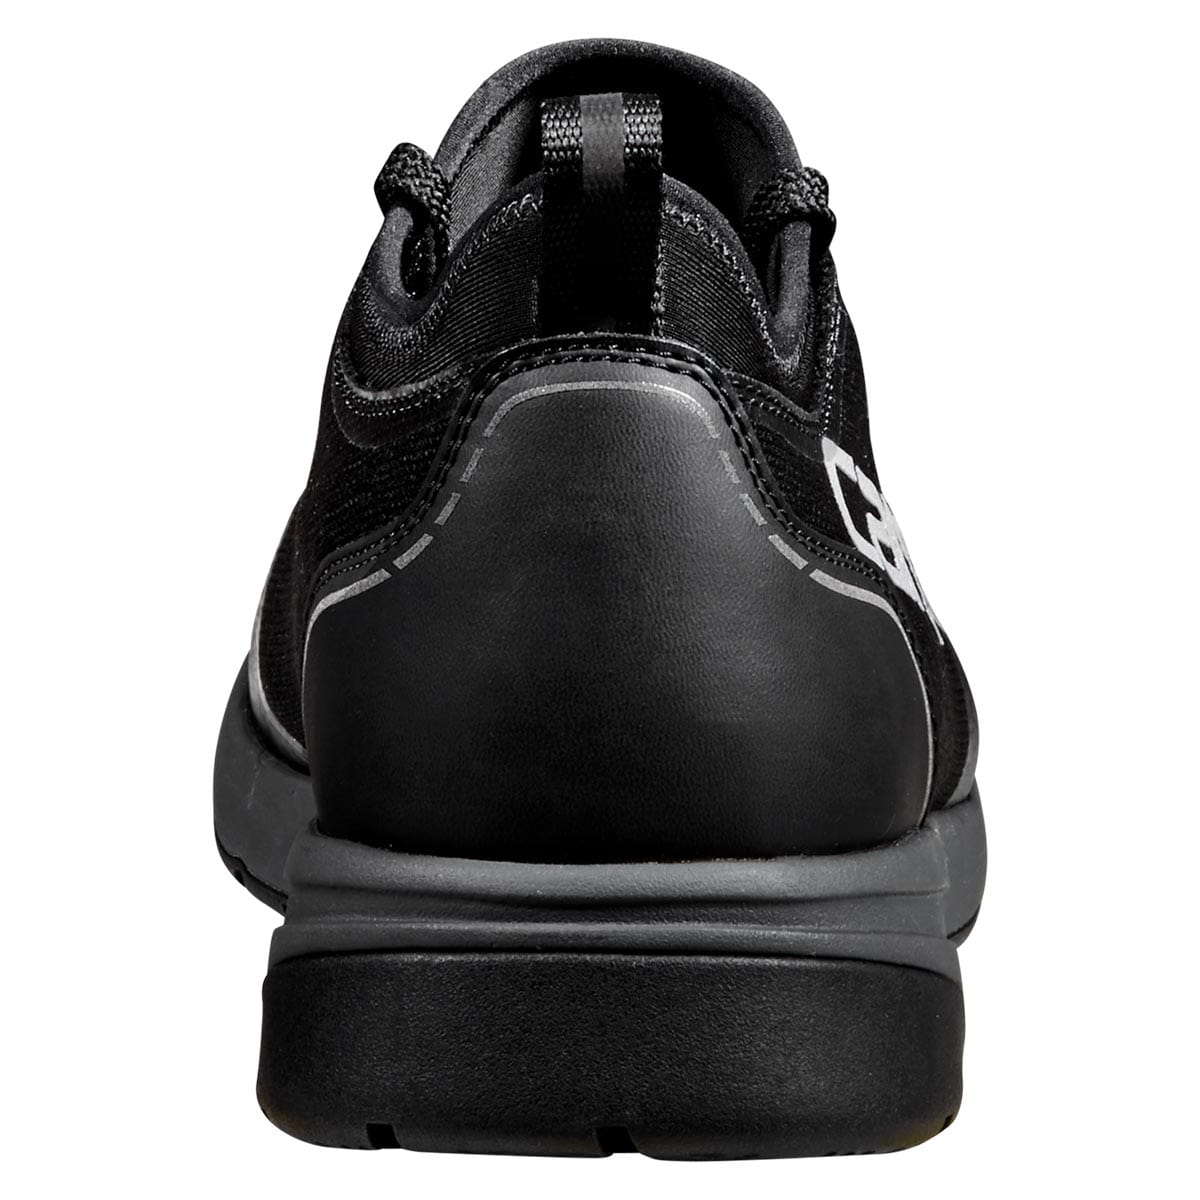 Carhartt Force 3-inch SD Work Shoes-Black